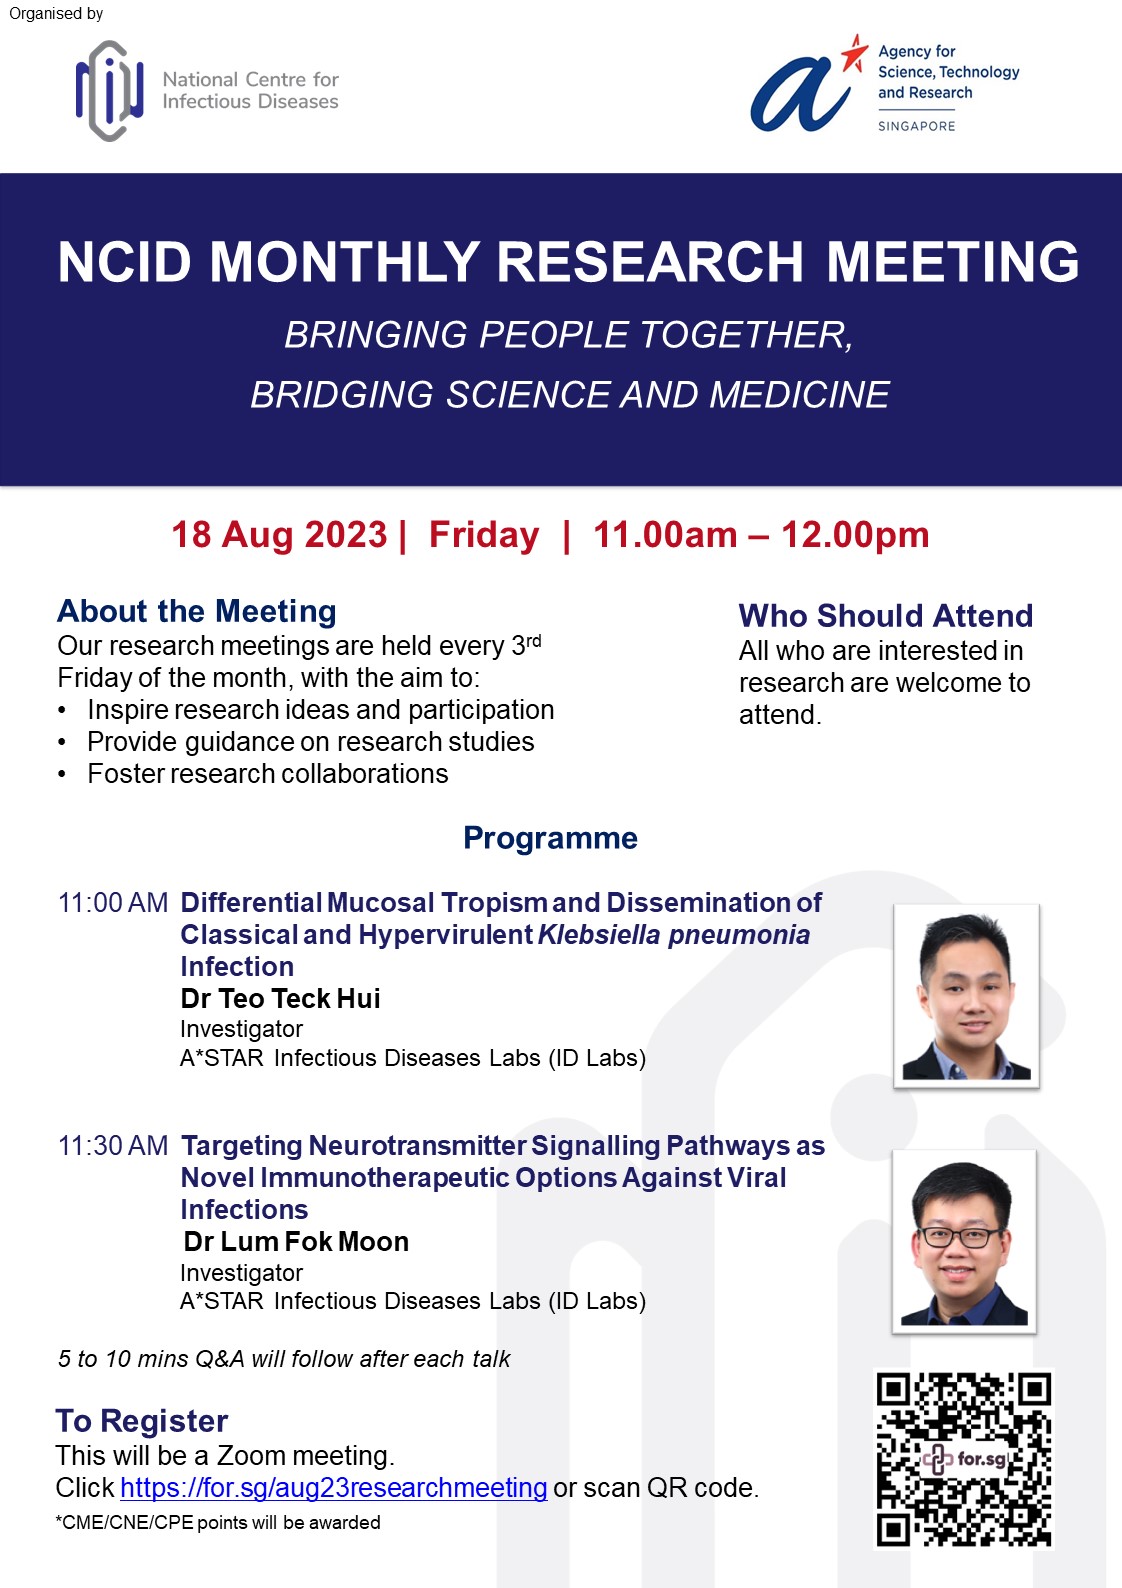 NCID Research Meeting Publicity Poster_Aug2023 (1).JPG